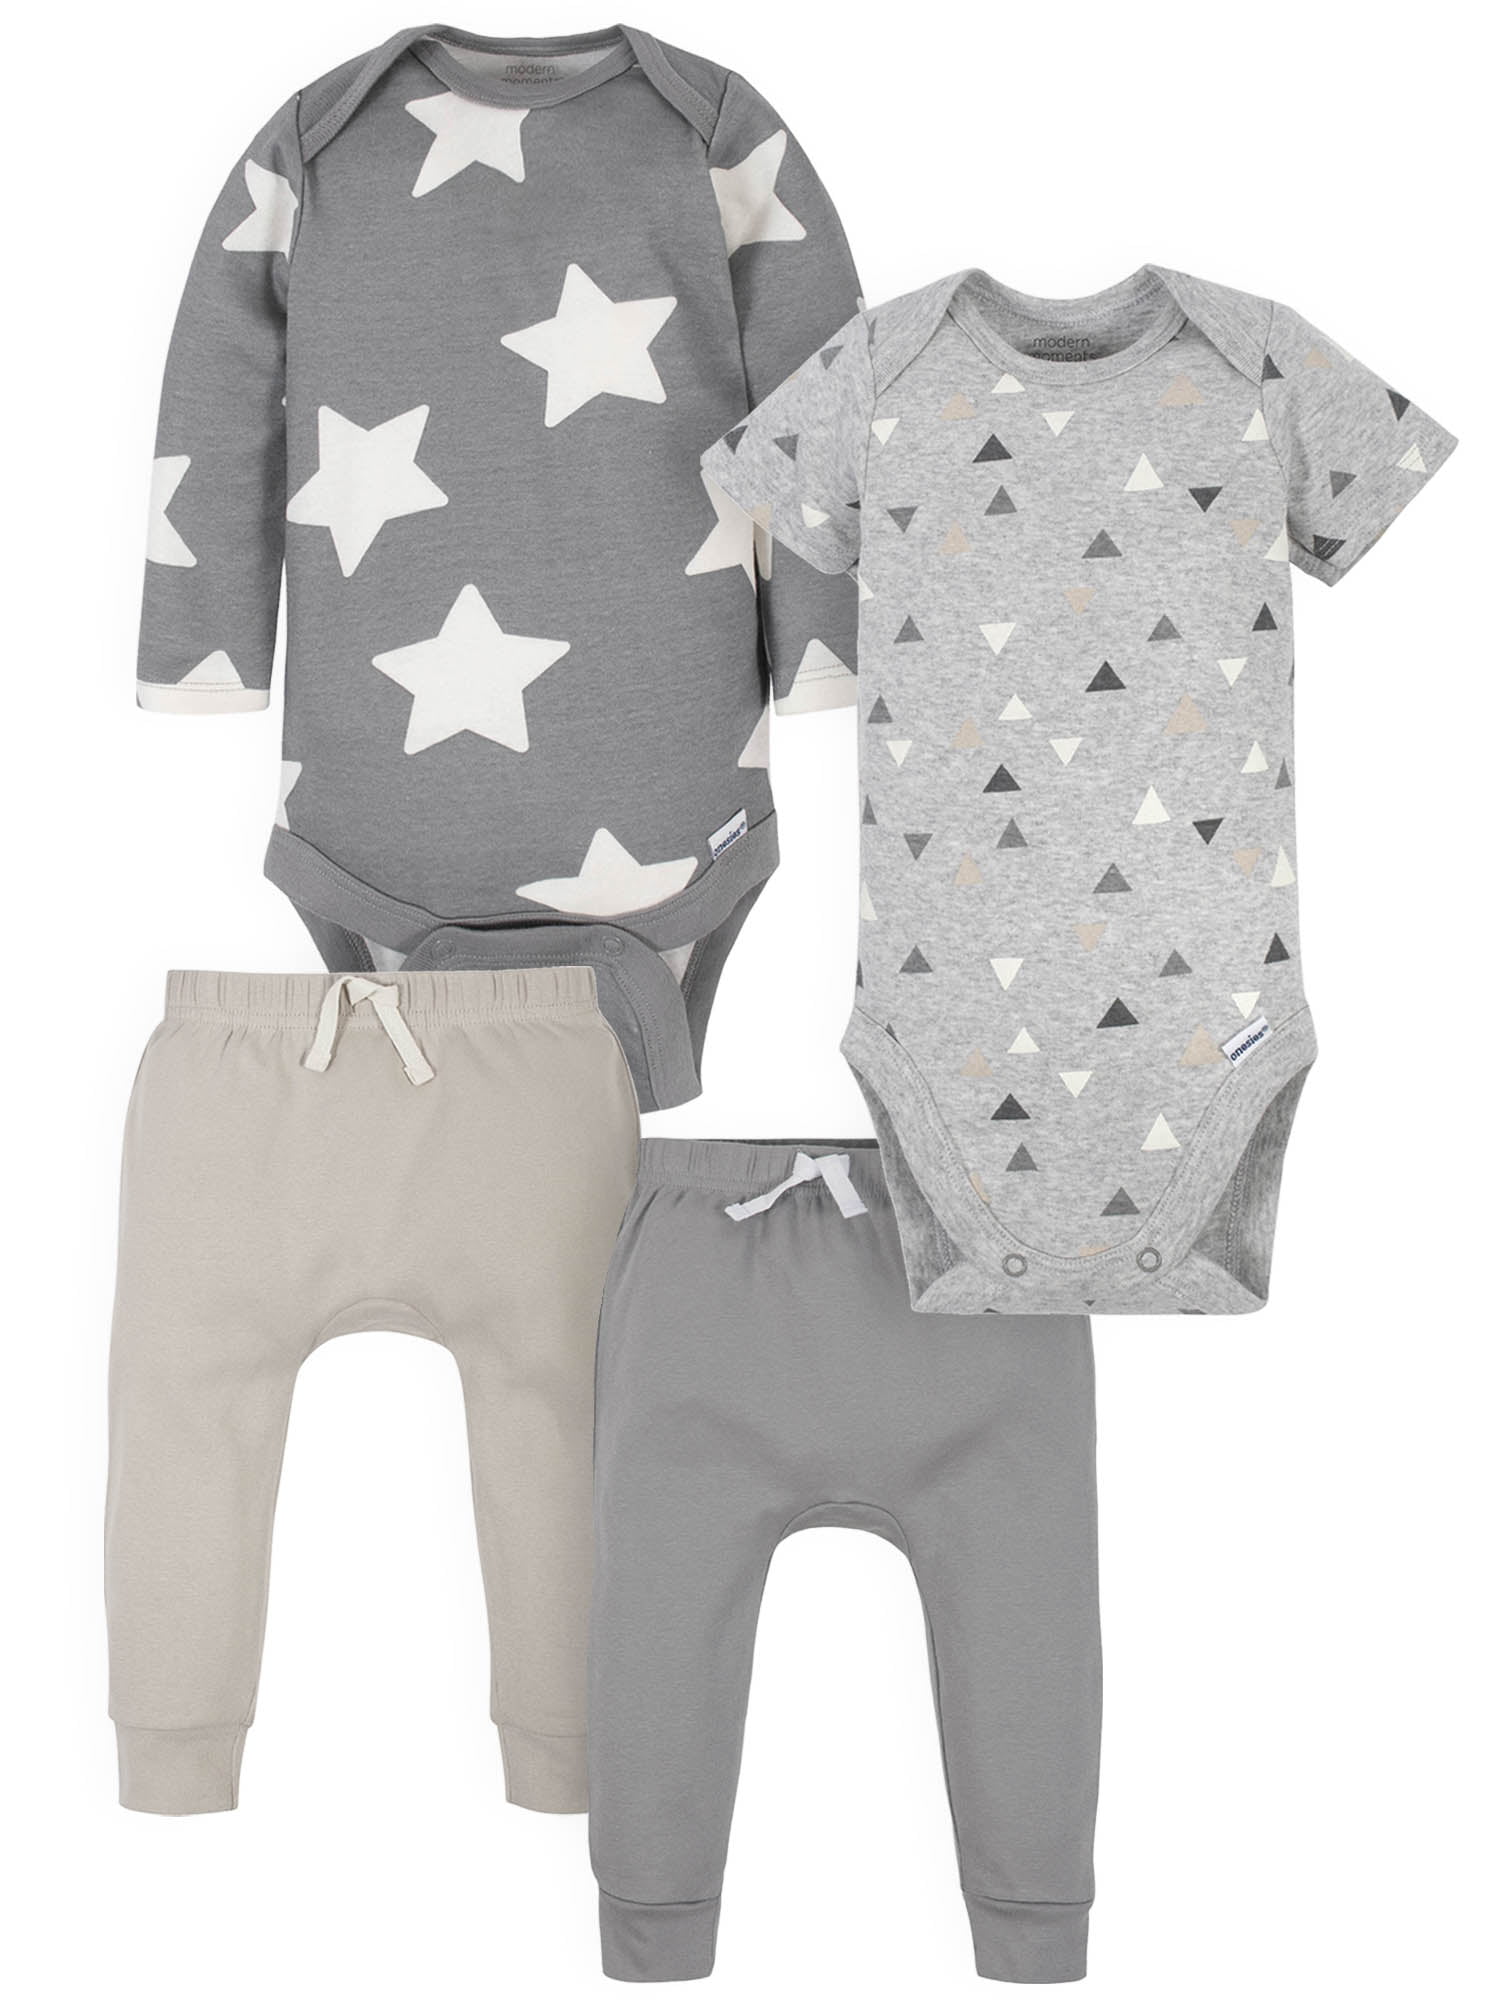 Modern Moments by Gerber Baby Boy Bodysuits and Pants Outfit Set, 4 ...